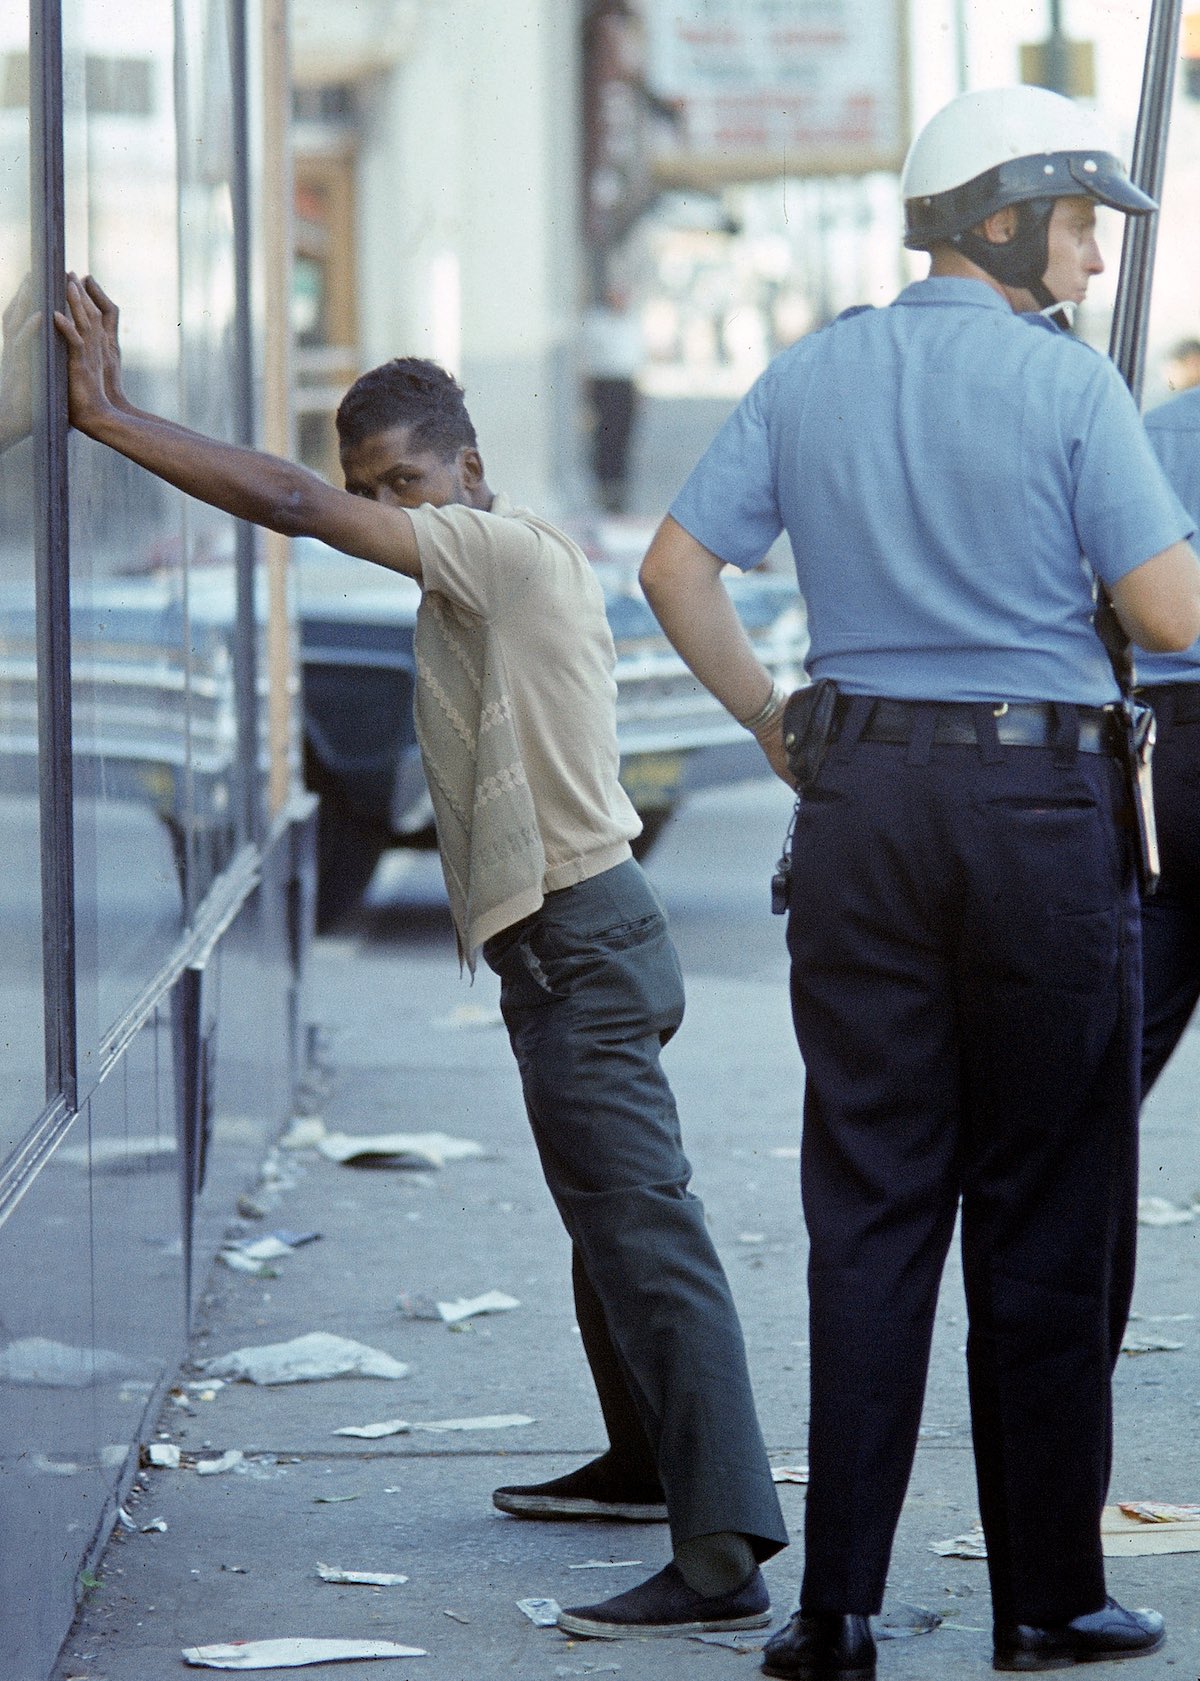 Policeman arresting an African American after race